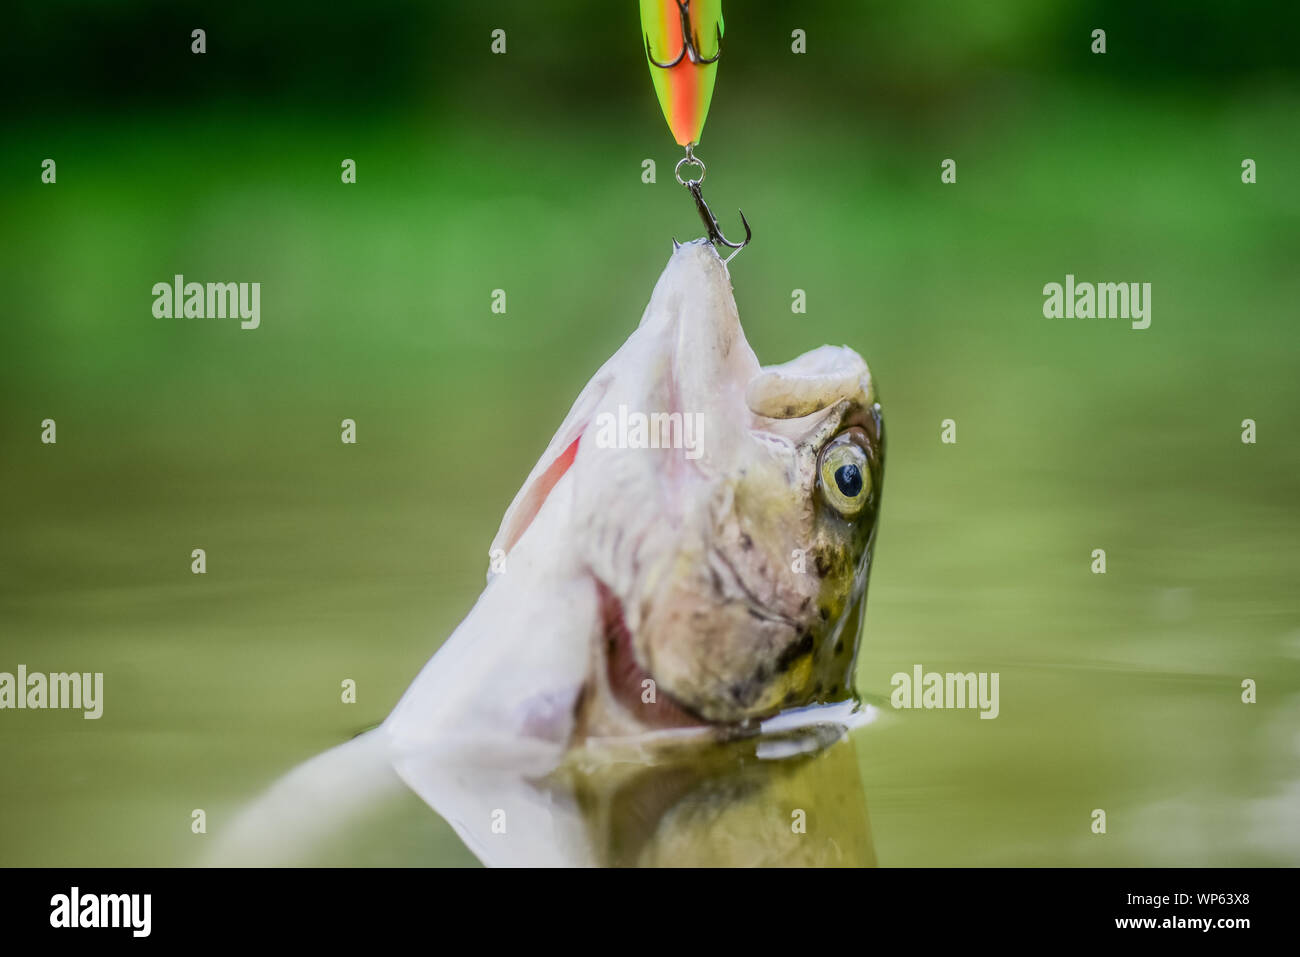 Fish in trap close up. fishing equipment. Fish open mouth hang on